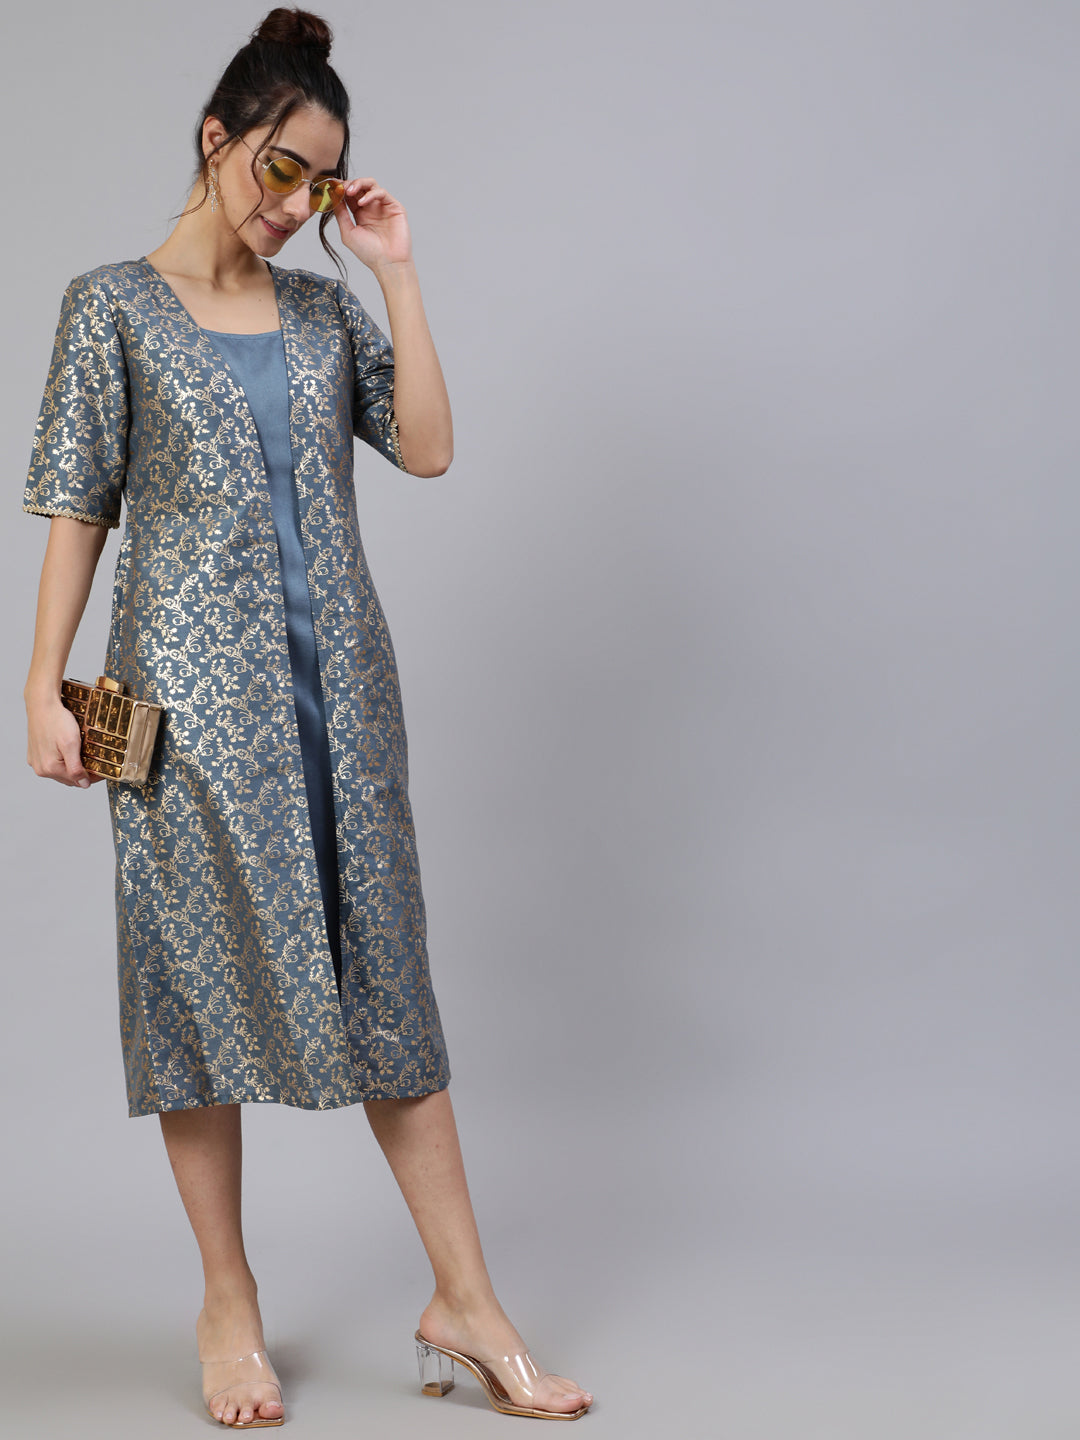 Grey Foil Printed A-Line Dress With Jacket